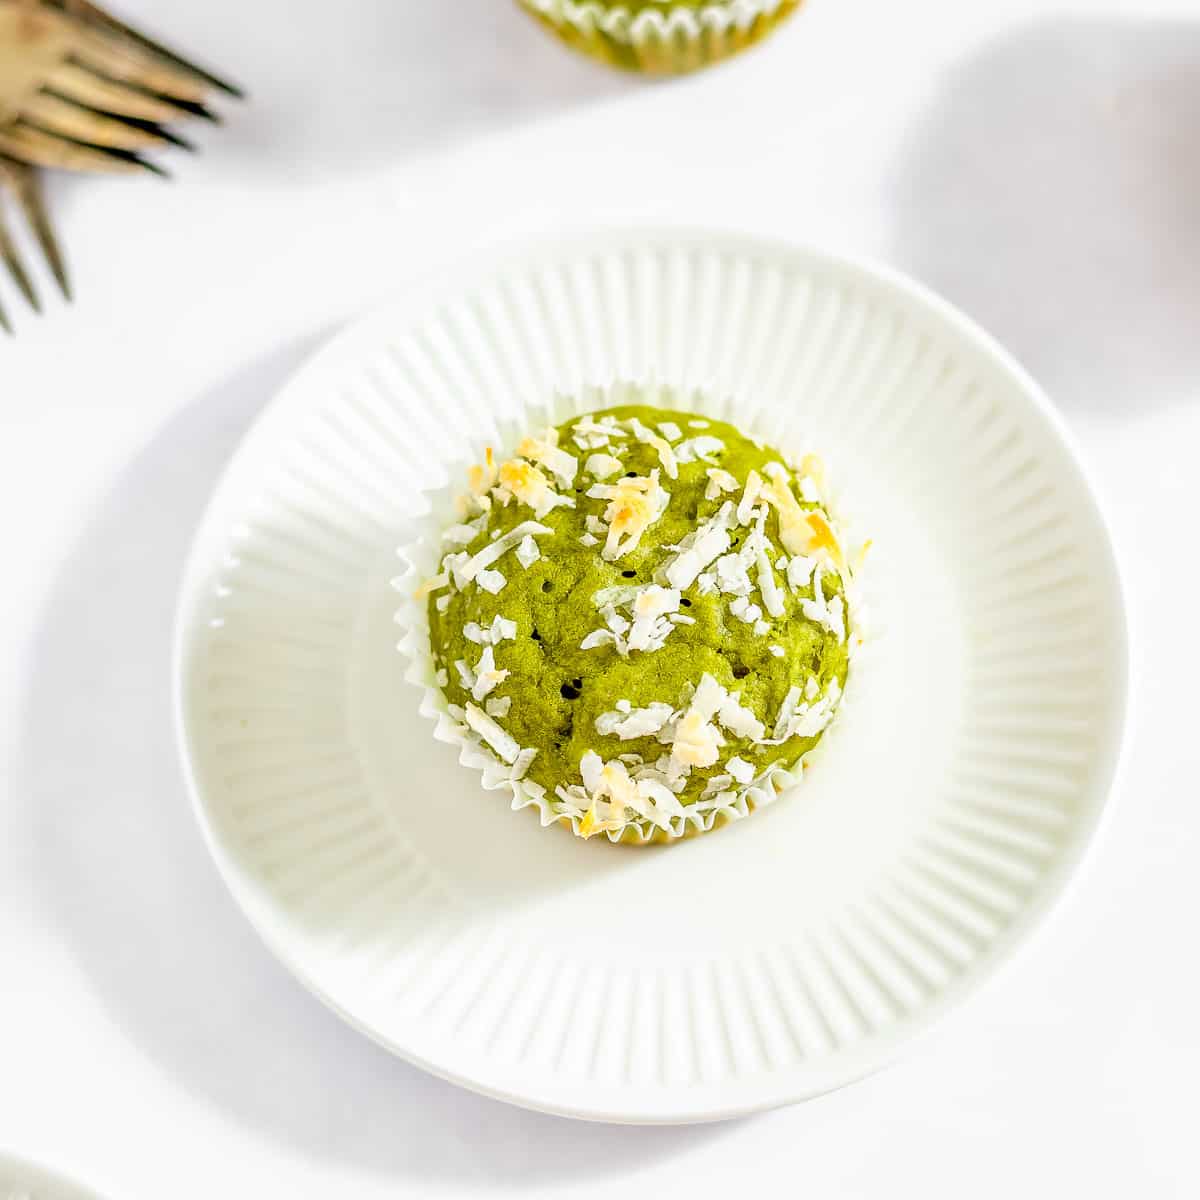 Overhead shot of a matcha muffin garnish with toasted coconut flakes with a white cupcake liner on a white circle plate on a white surface with silverware on the side.